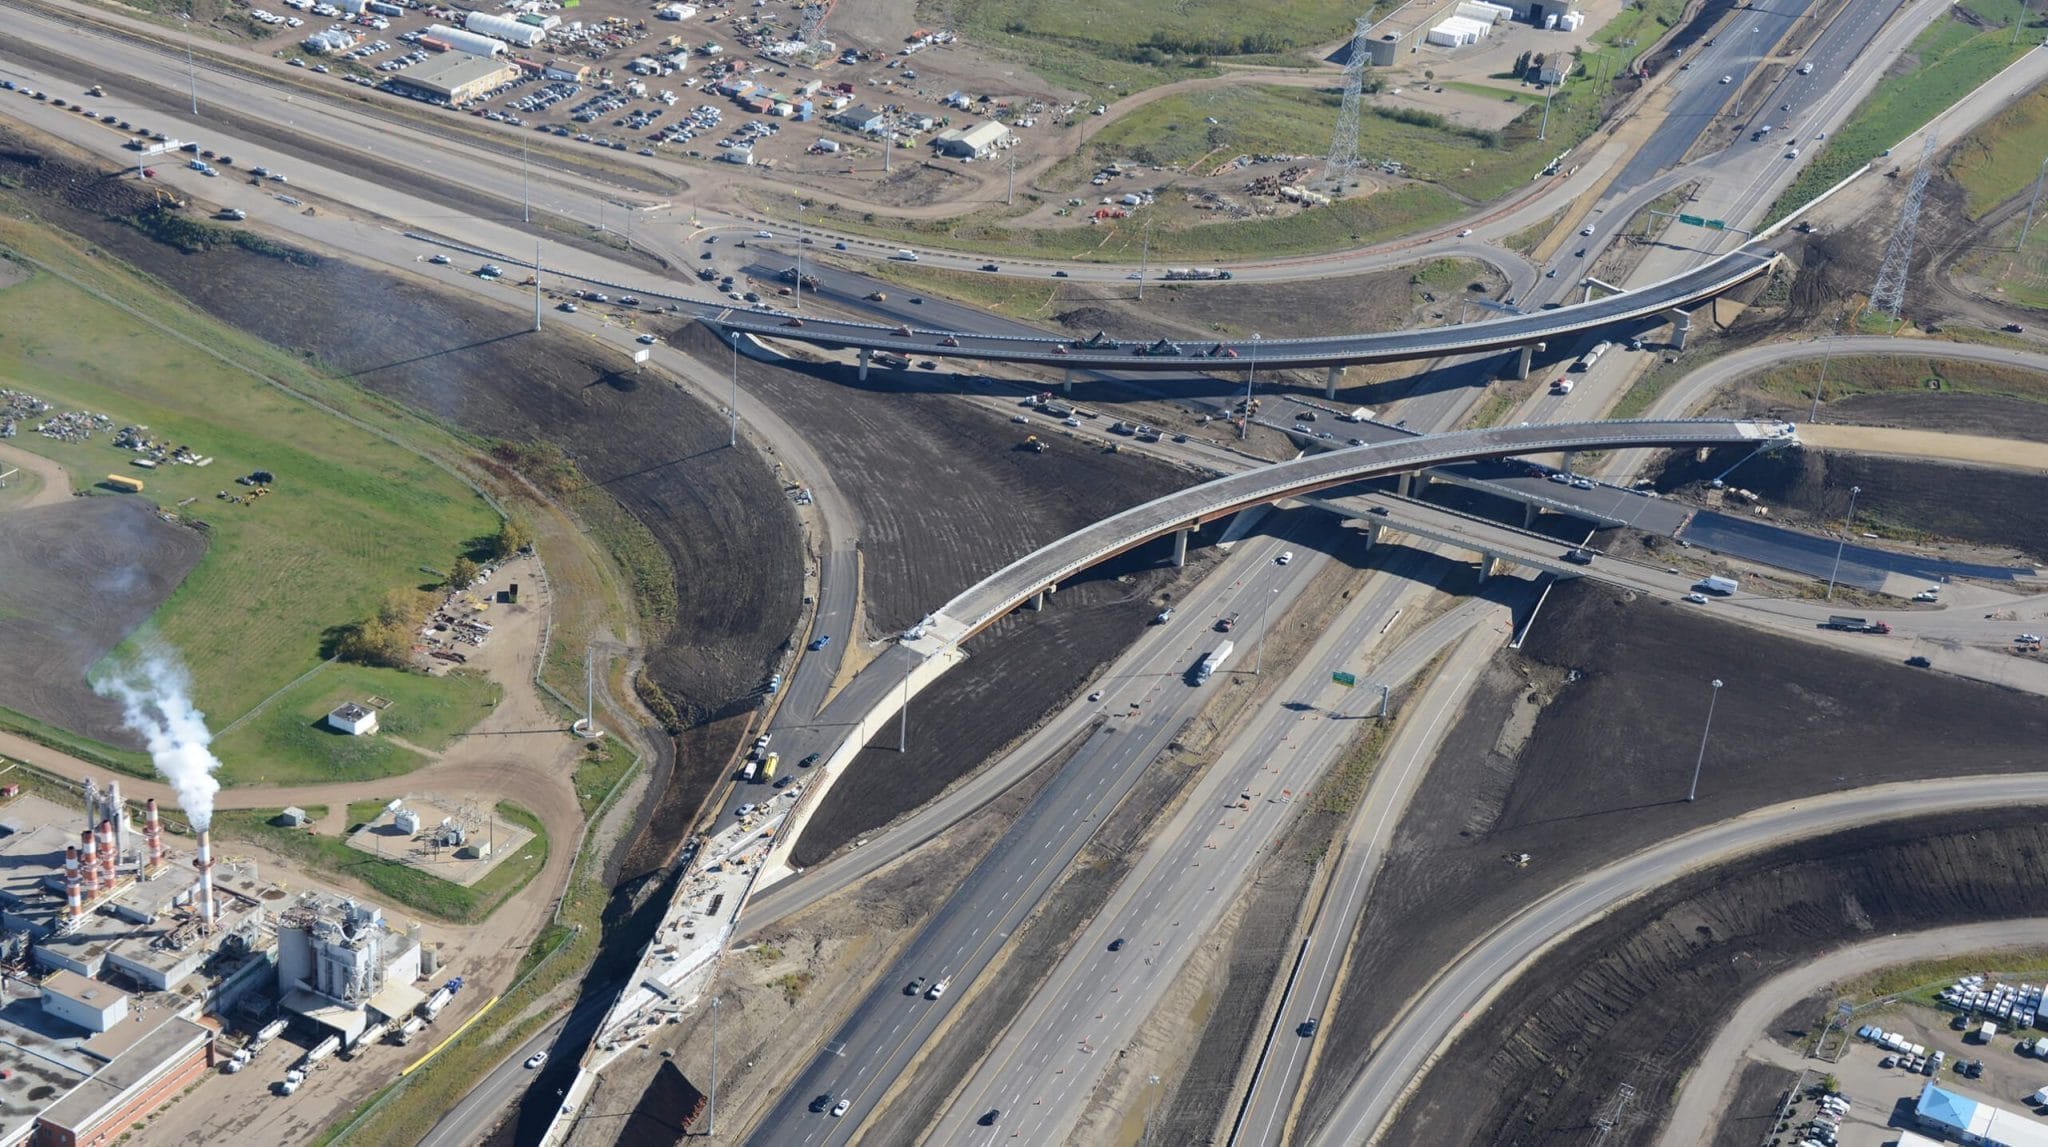 Aerial view of the Northeast Anthony Henday Drive highway